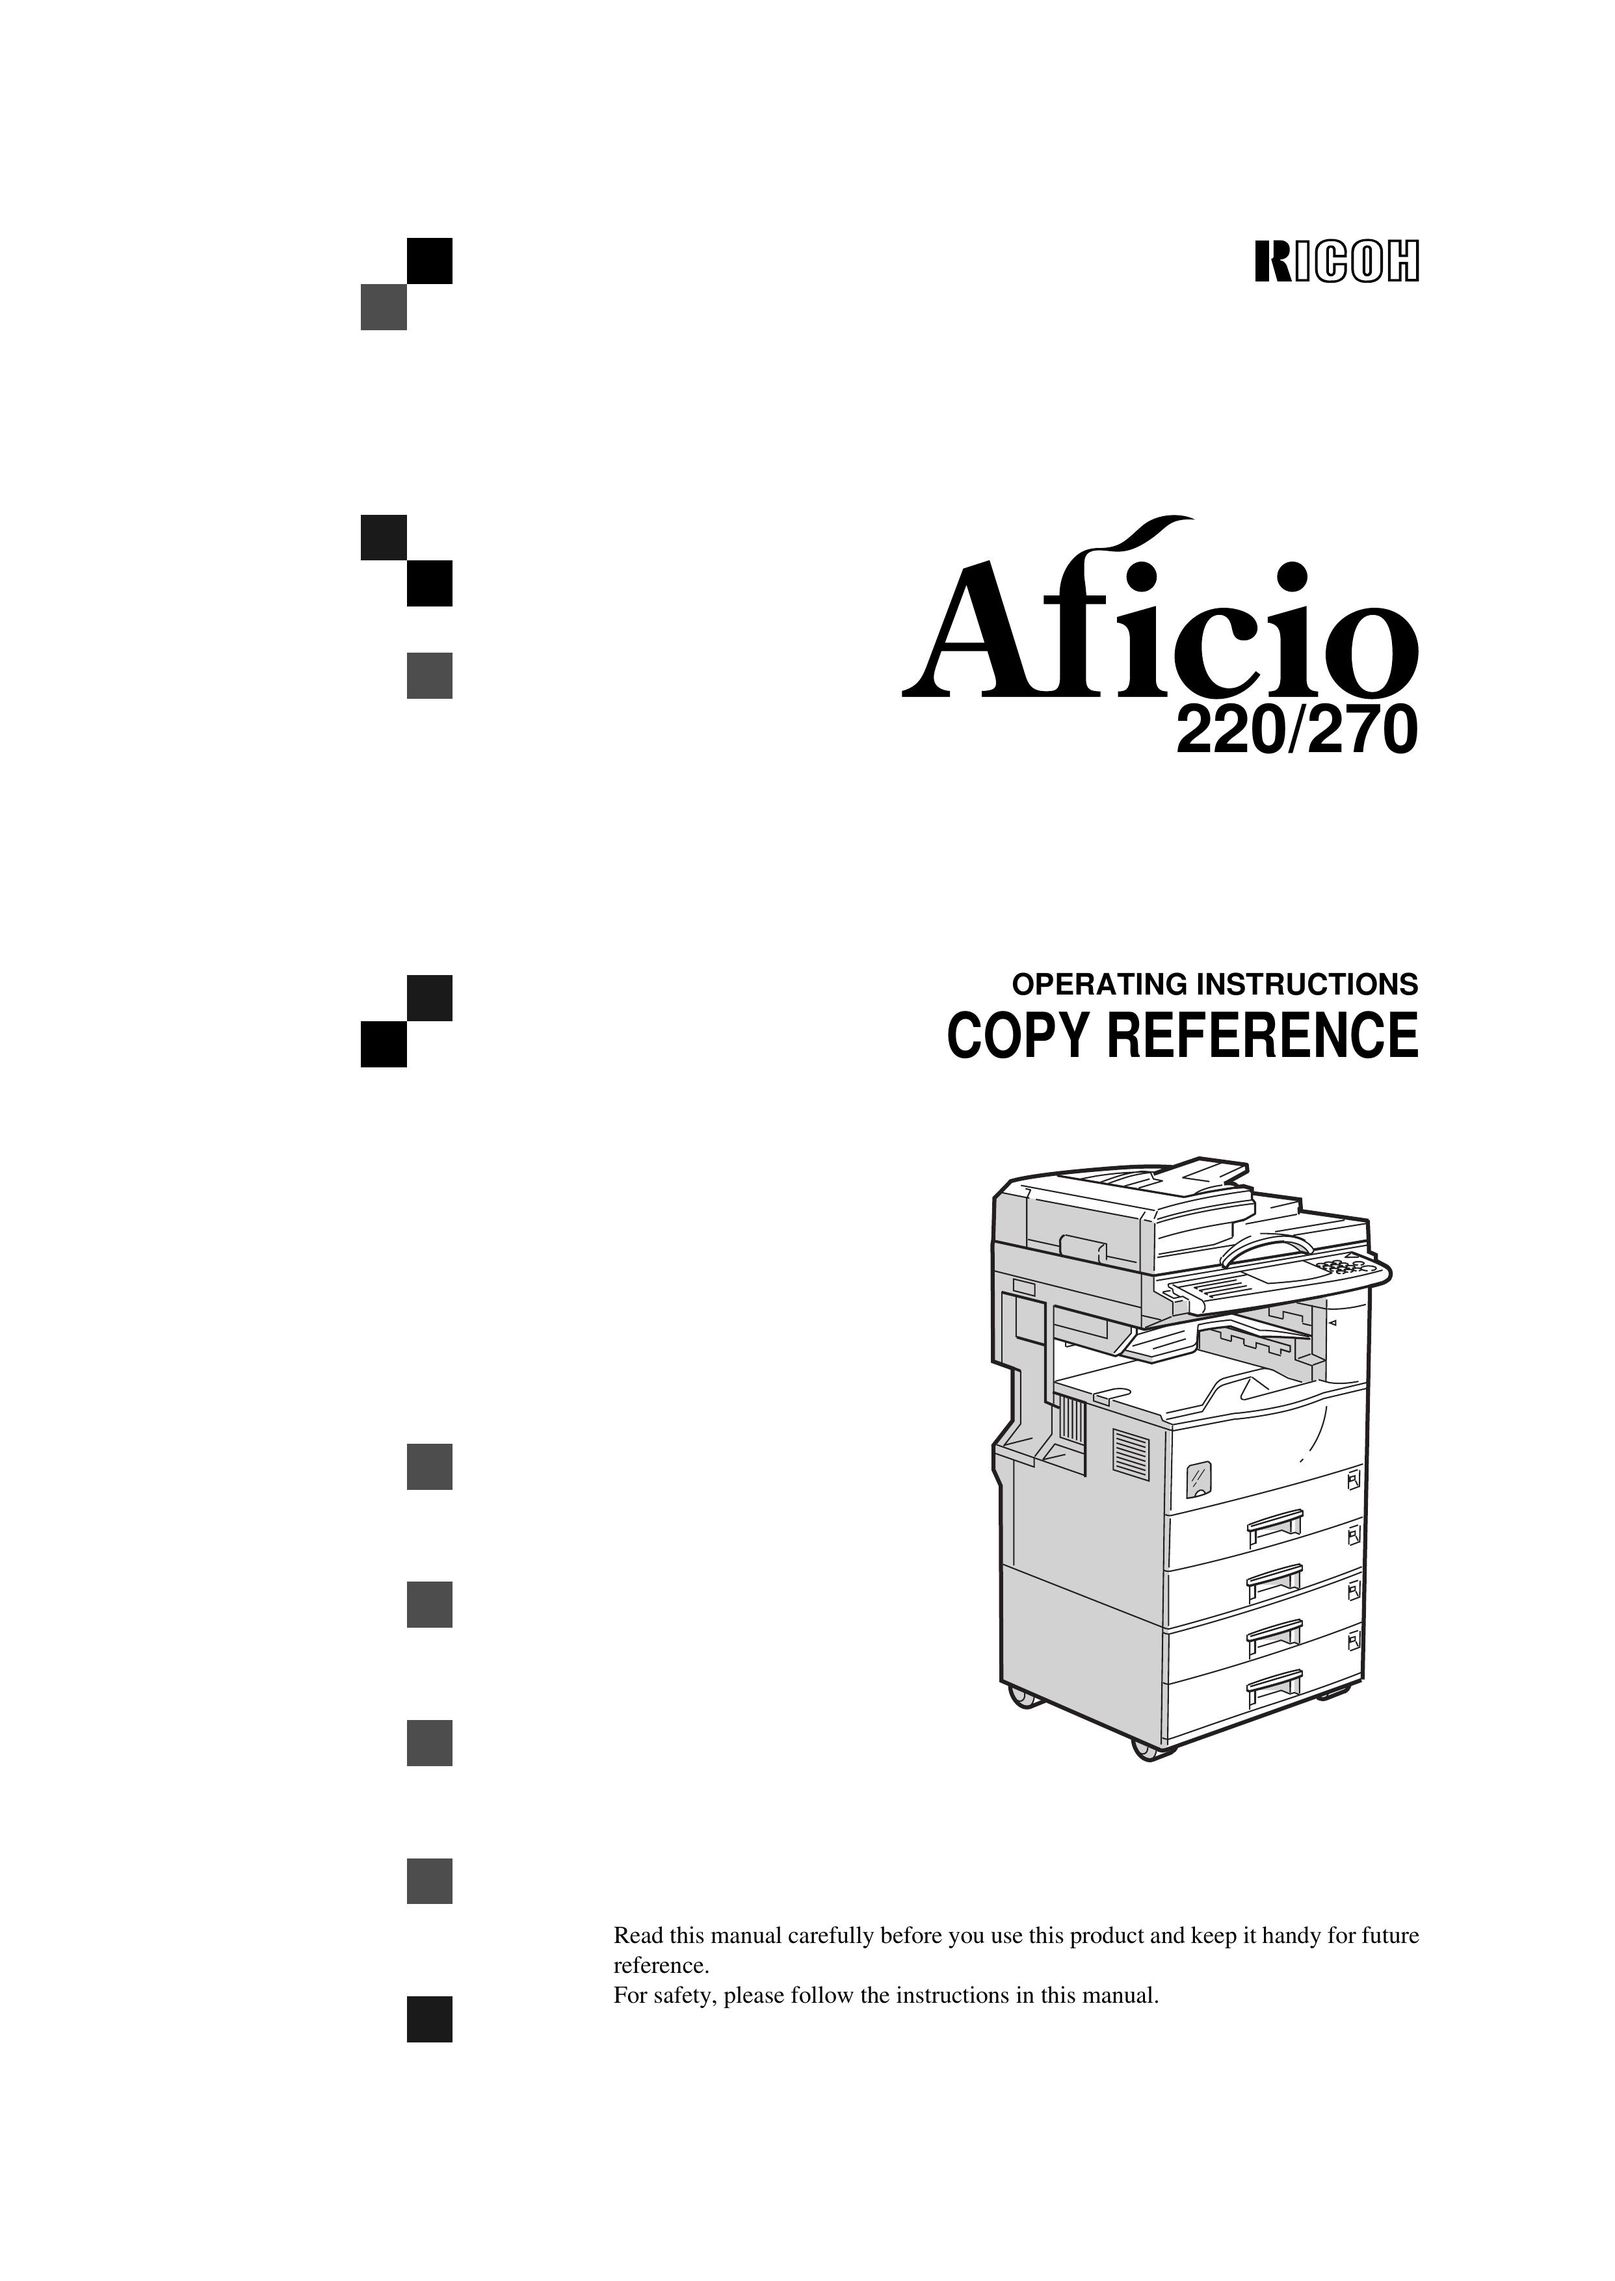 Ricoh 270 All in One Printer User Manual